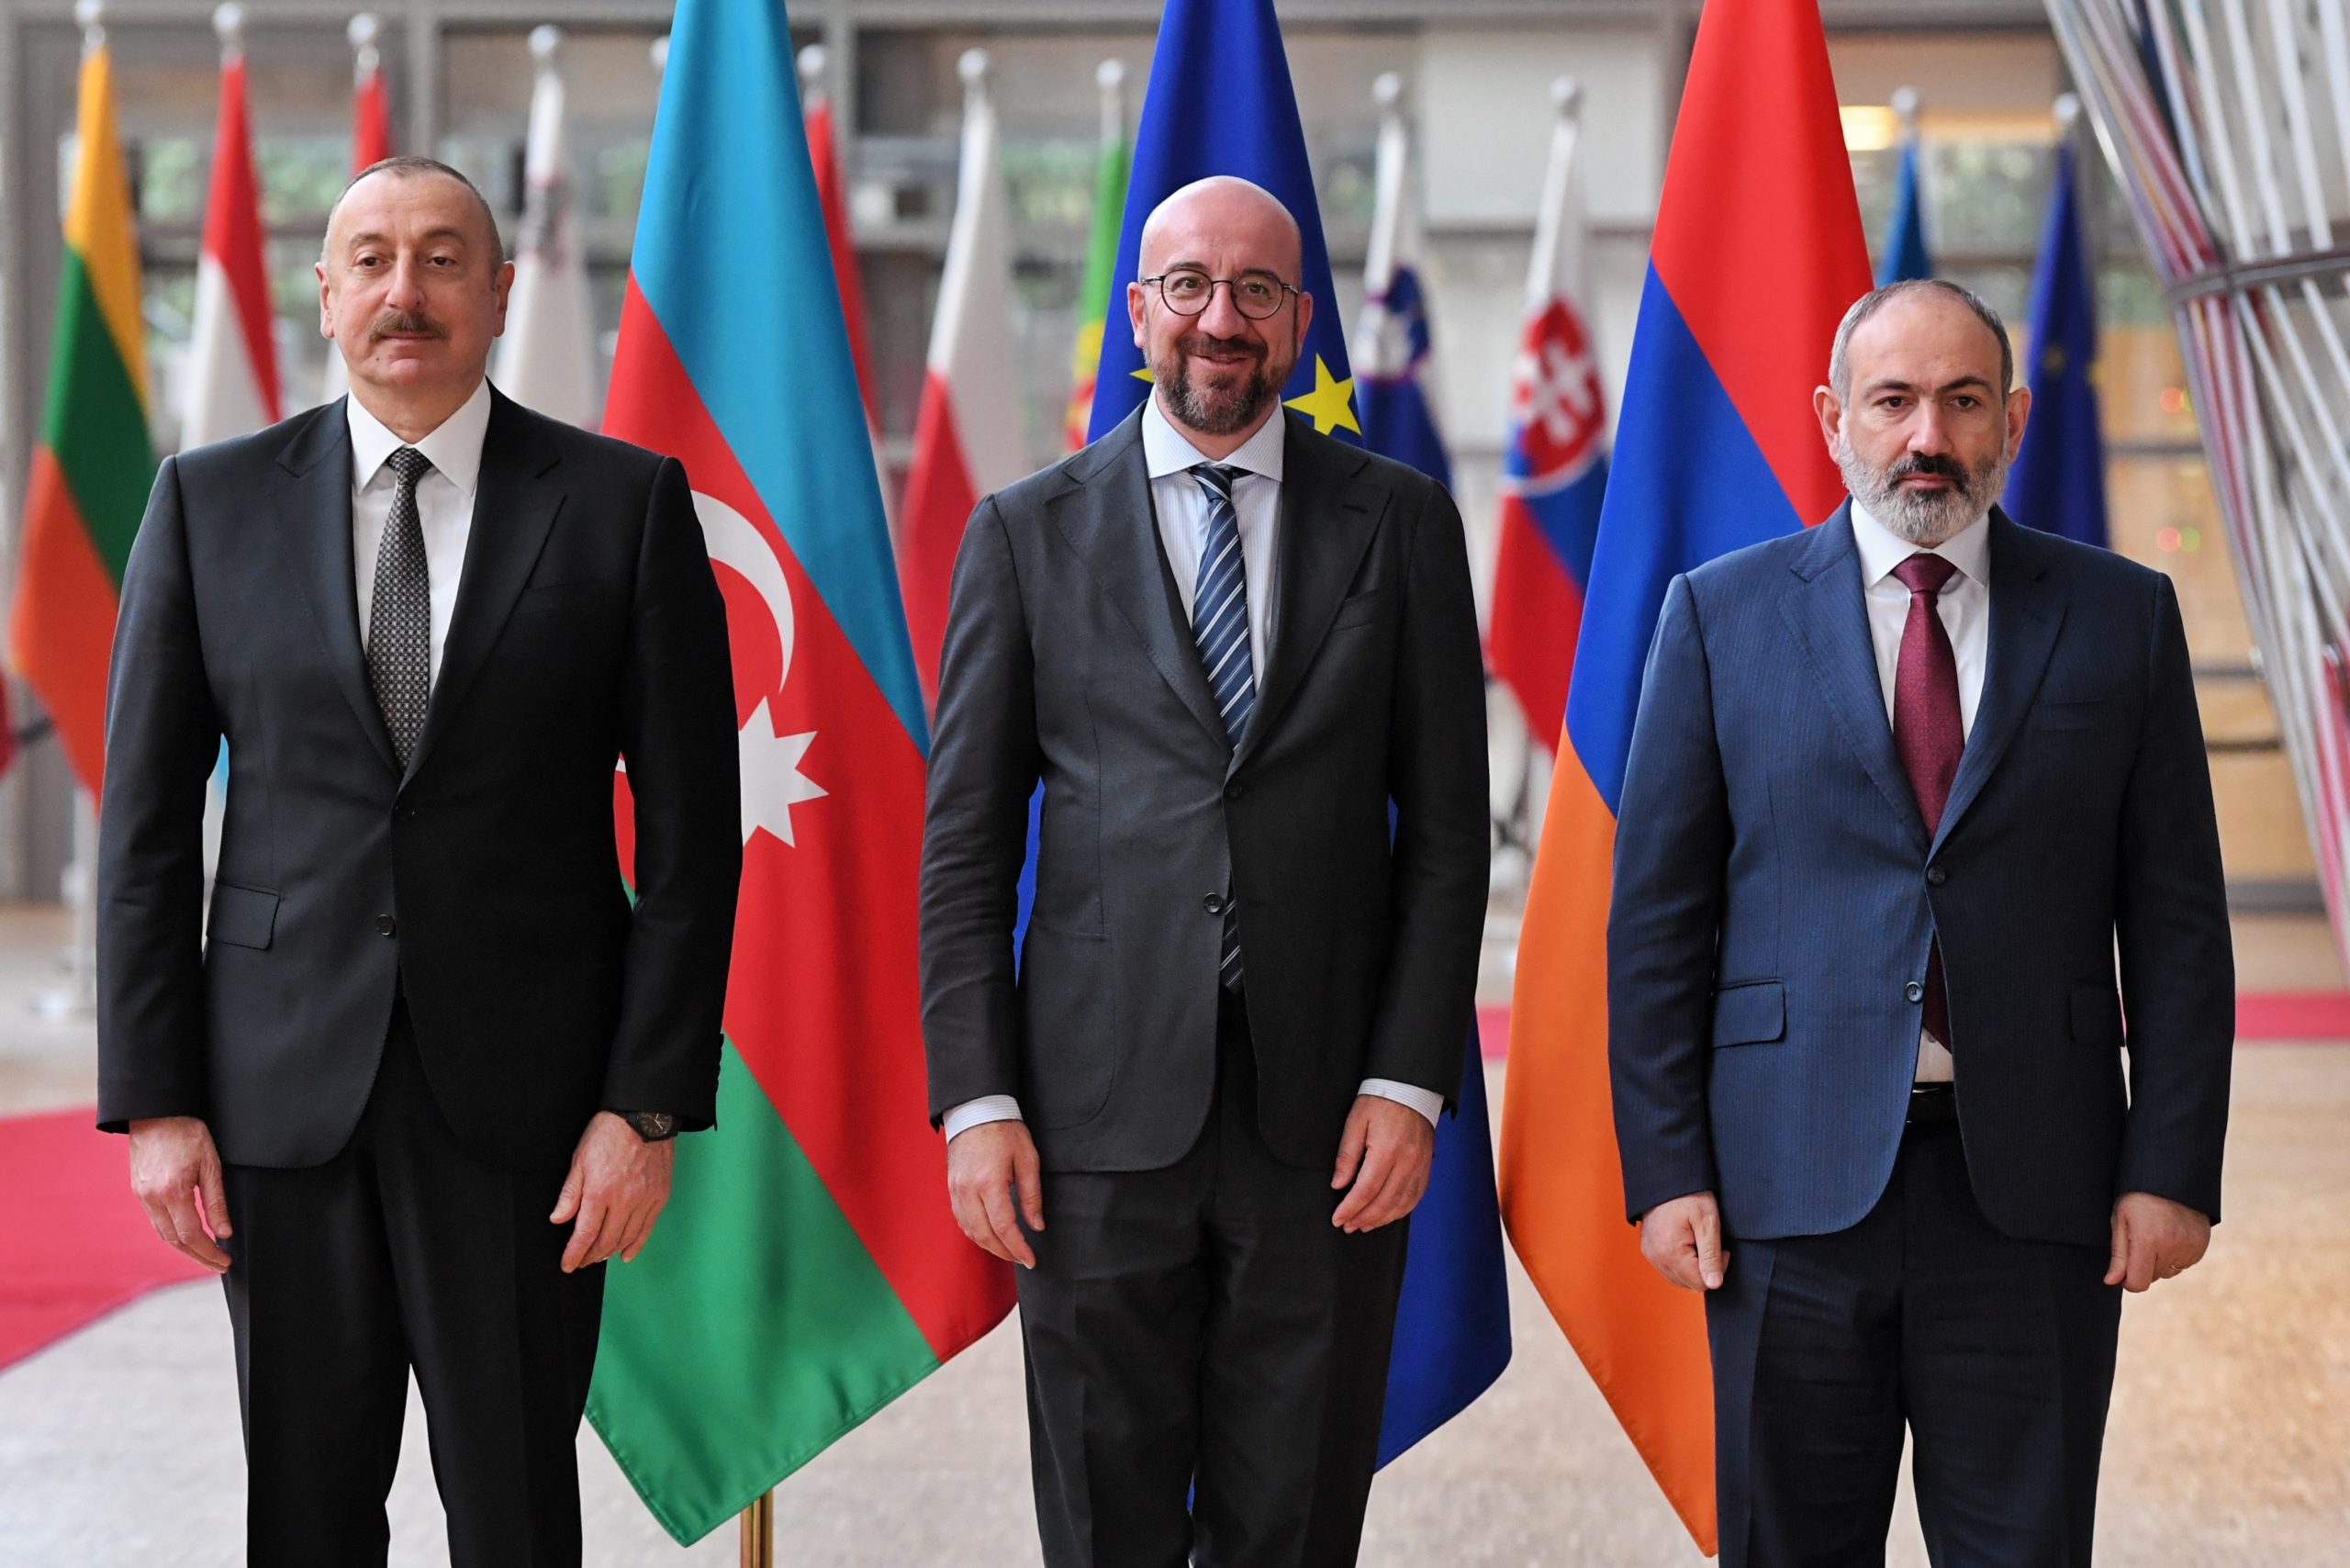 Azerbaijani-President-Ilham-Aliyev-European-Council-President-Charles-Michel-and-Armenian-Prime-Minister-Nikol-Pashinyan-meet-in-Brussels-European-Council-May-23-scaled